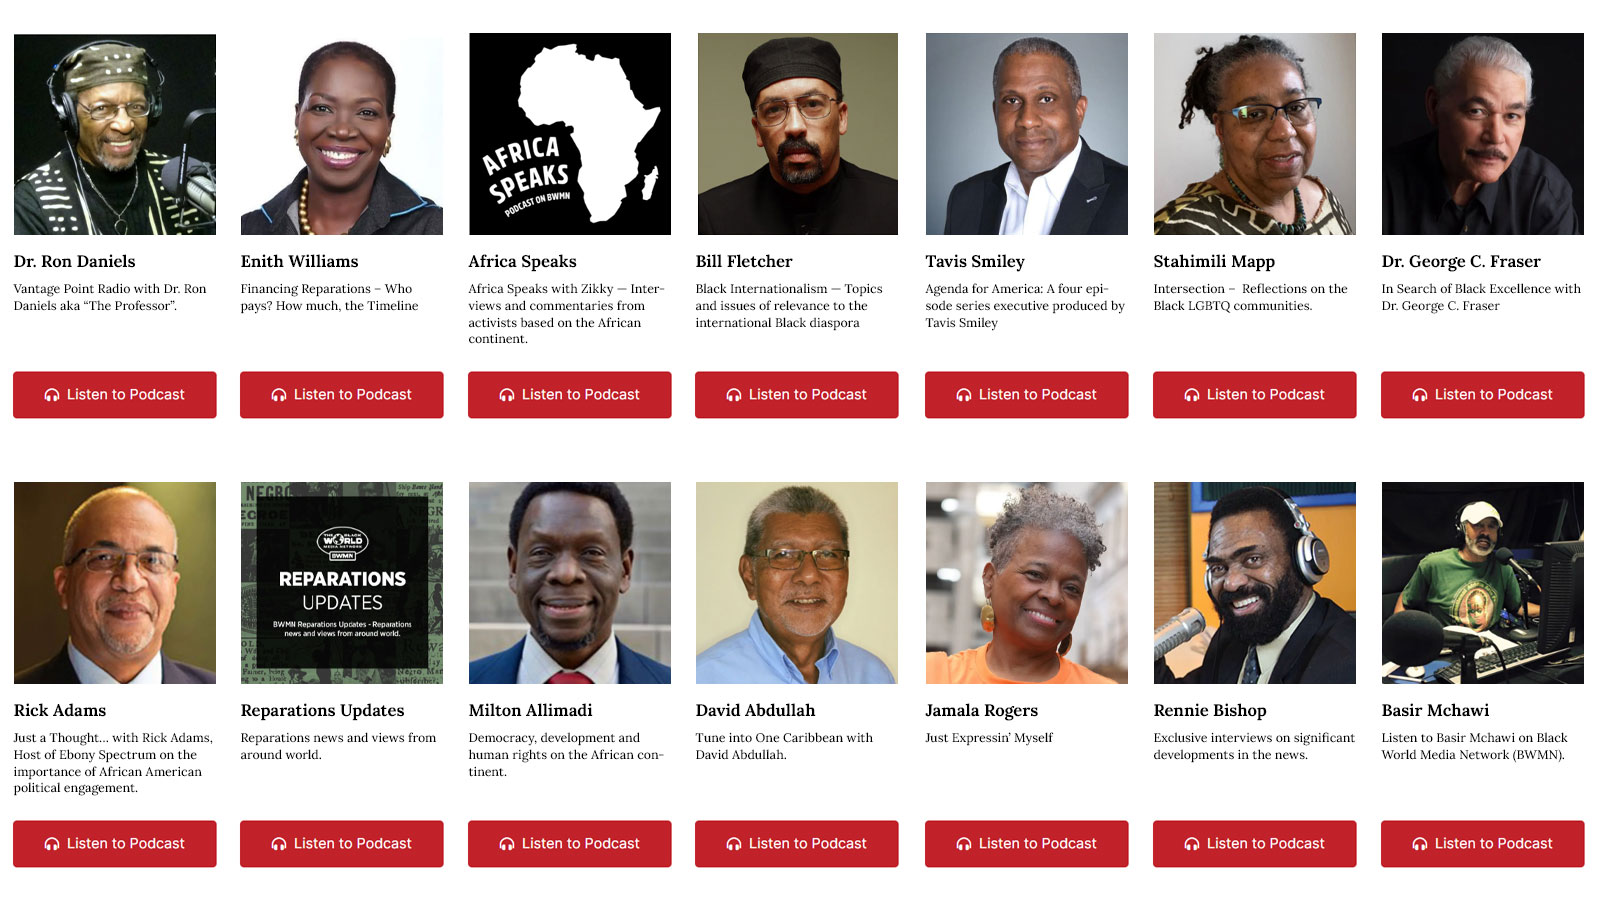 BWMN Podcasts: Podcasts and commentaries from some of the Pan-African world’s sharpest and most insightful analysts and pundits.